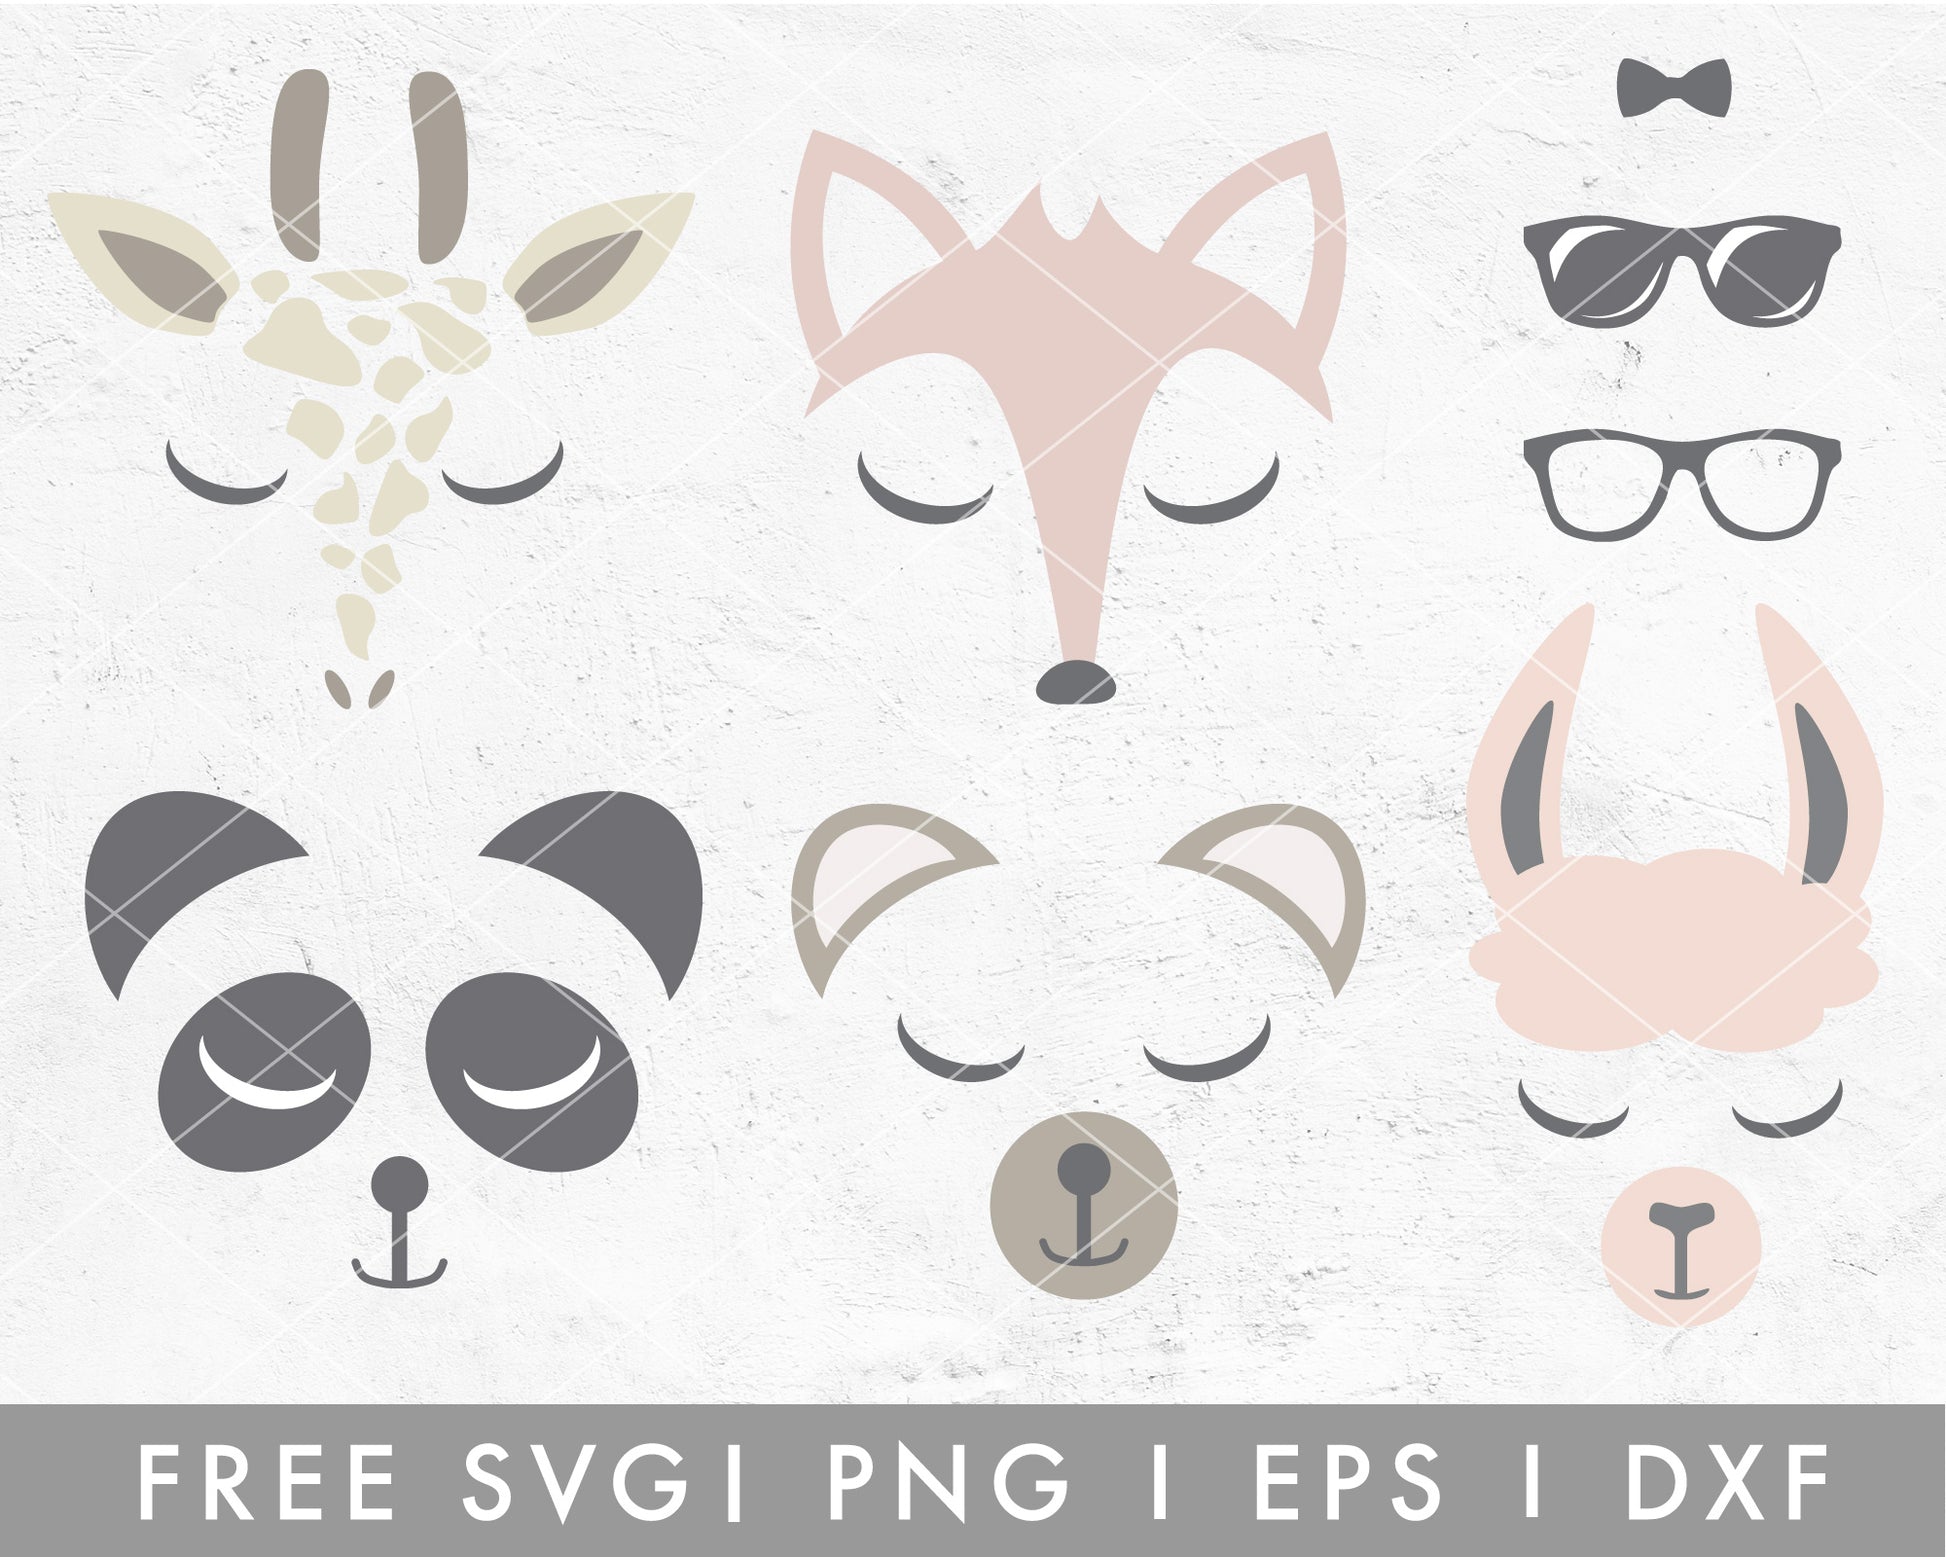 FREE Animal Faces SVG Cut File for Cricut, Cameo Silhouette | Free SVG, PNG, Vector